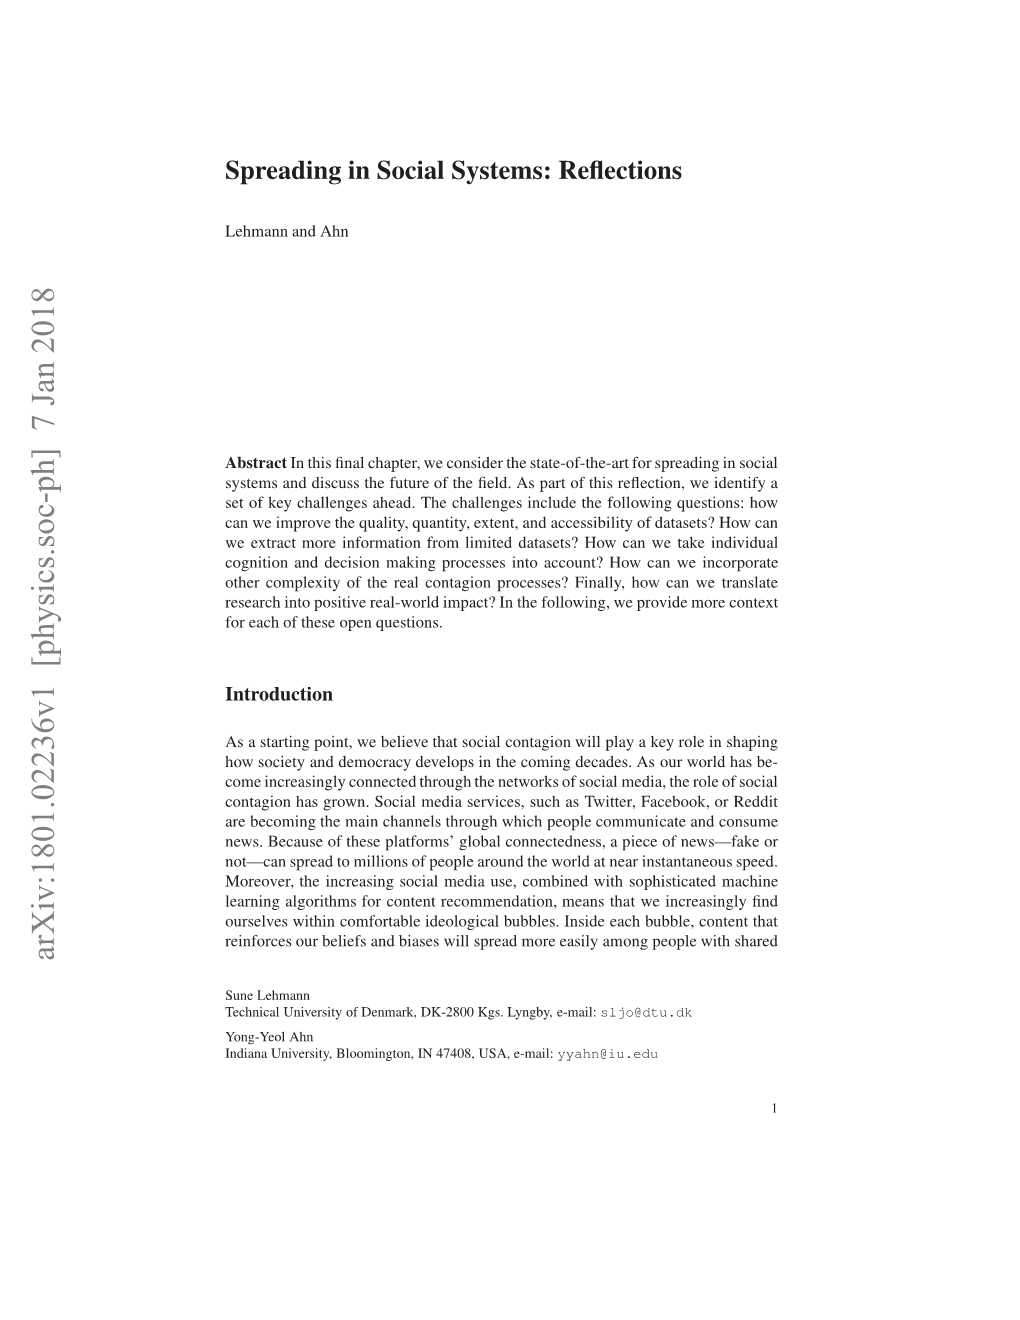 Spreading in Social Systems: Reflections